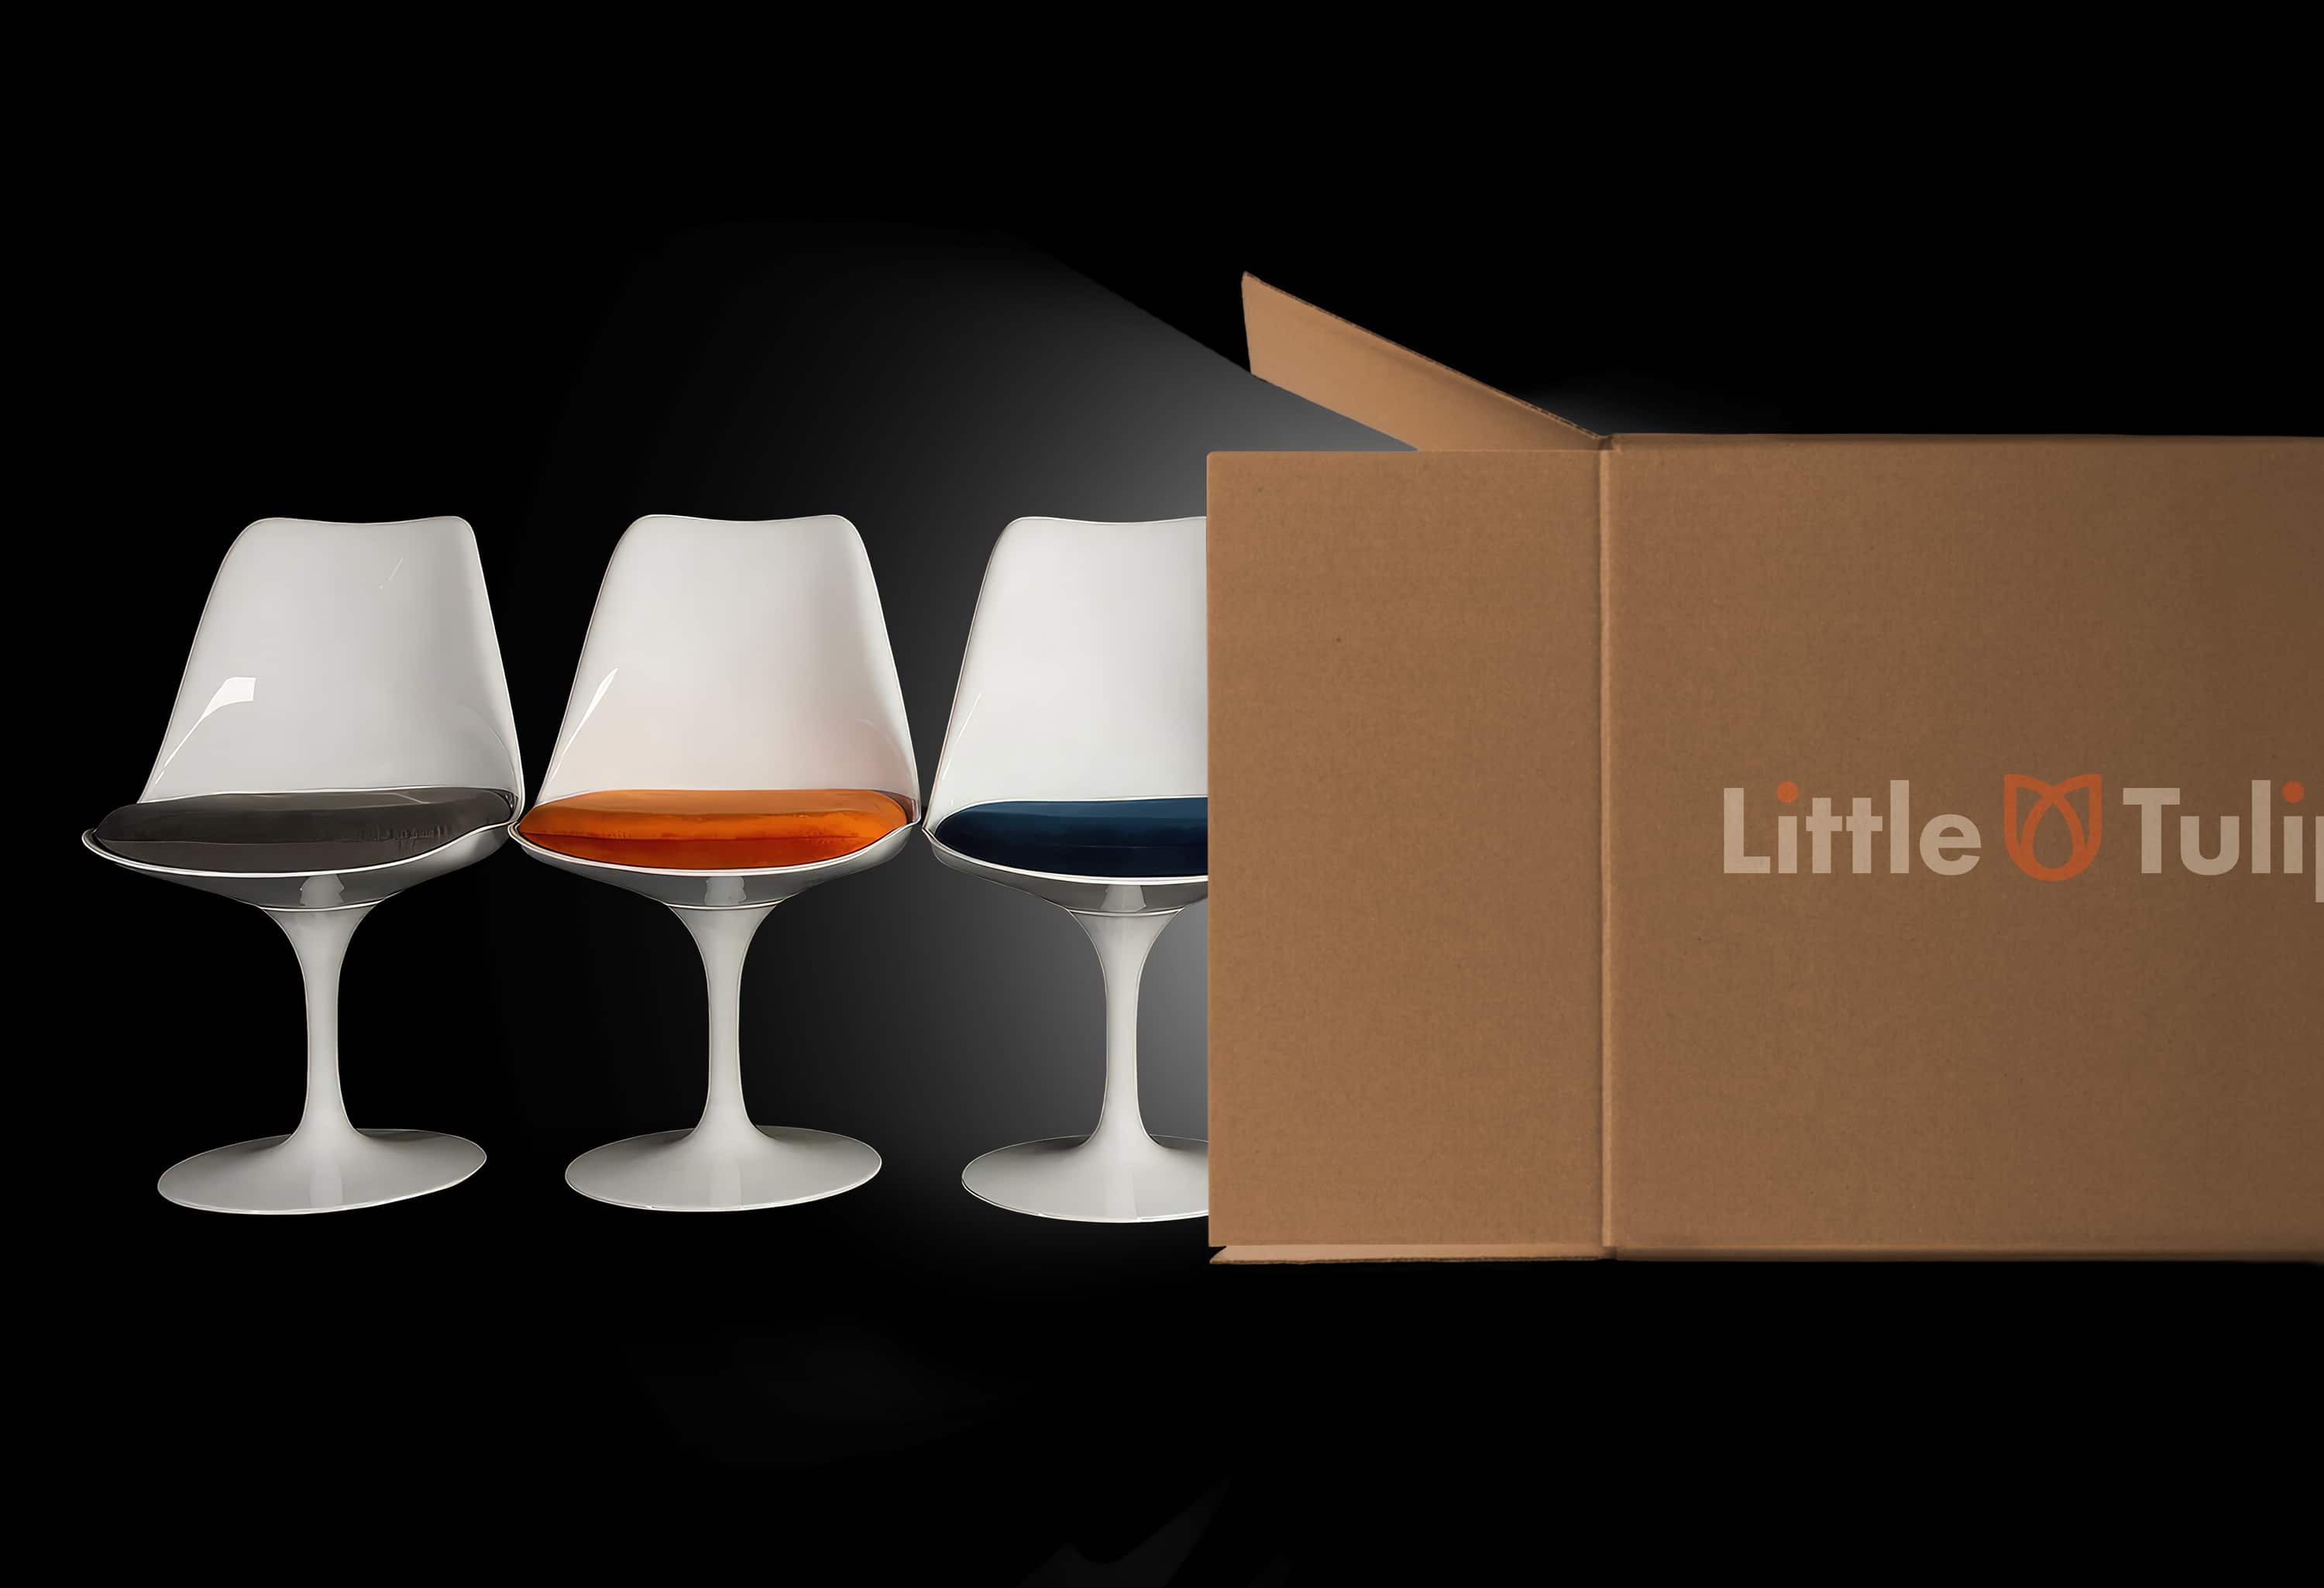 From the Little Tulip Shop delivery page is a banner that gives the visual impression of Tulip Chair products being delivered from an open box